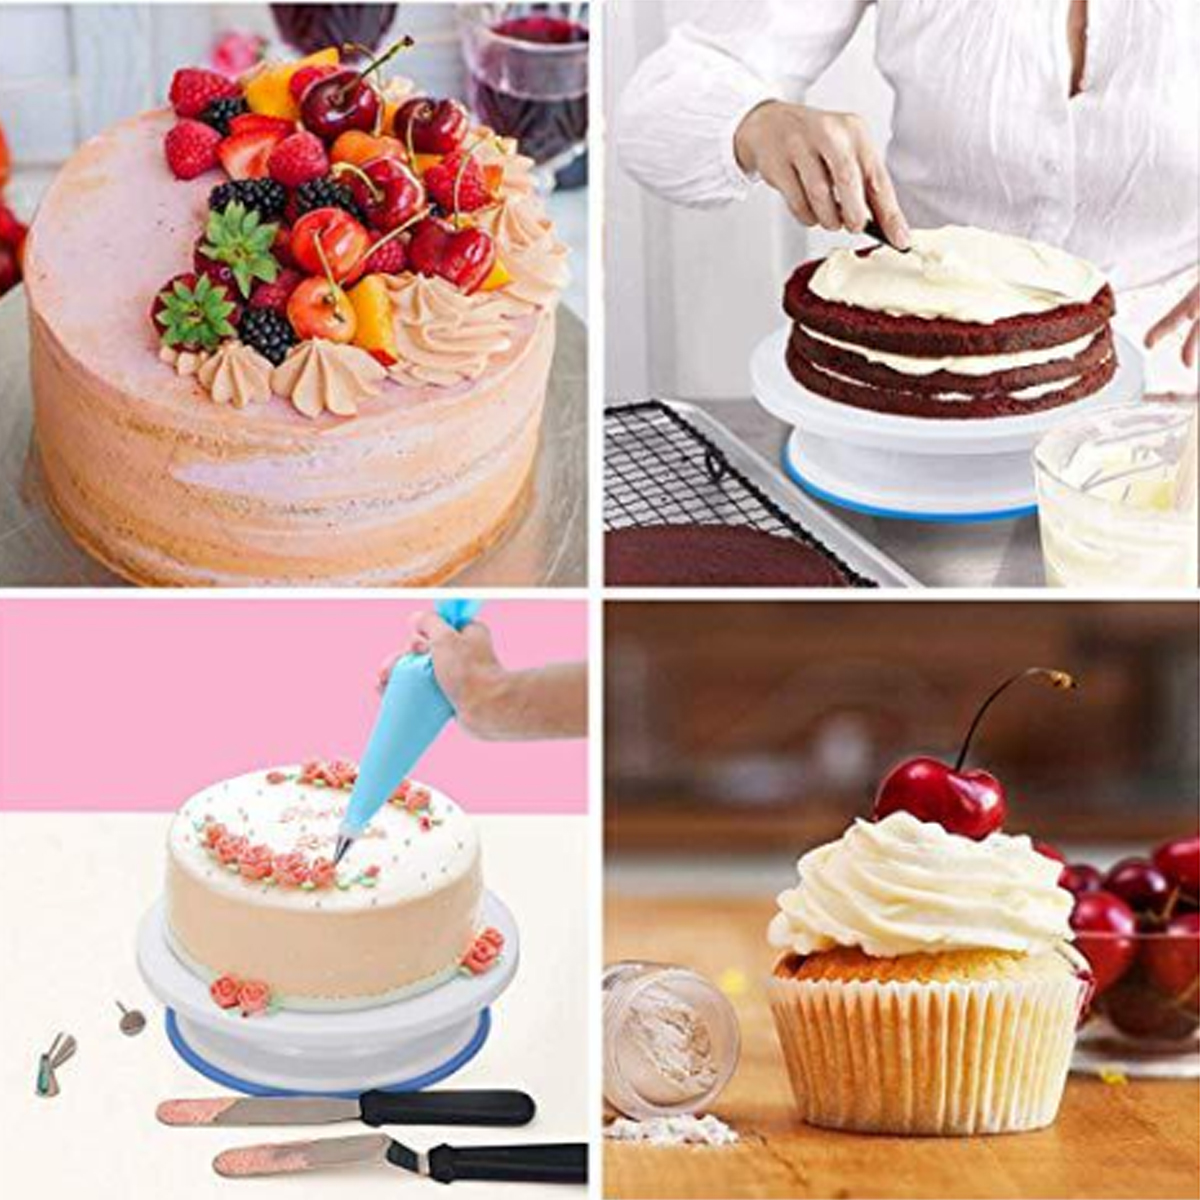 Find 120pcs Cake Decorating Tools Cake Turntable Kit DIY Mold Baking Supplies Set for Sale on Gipsybee.com with cryptocurrencies